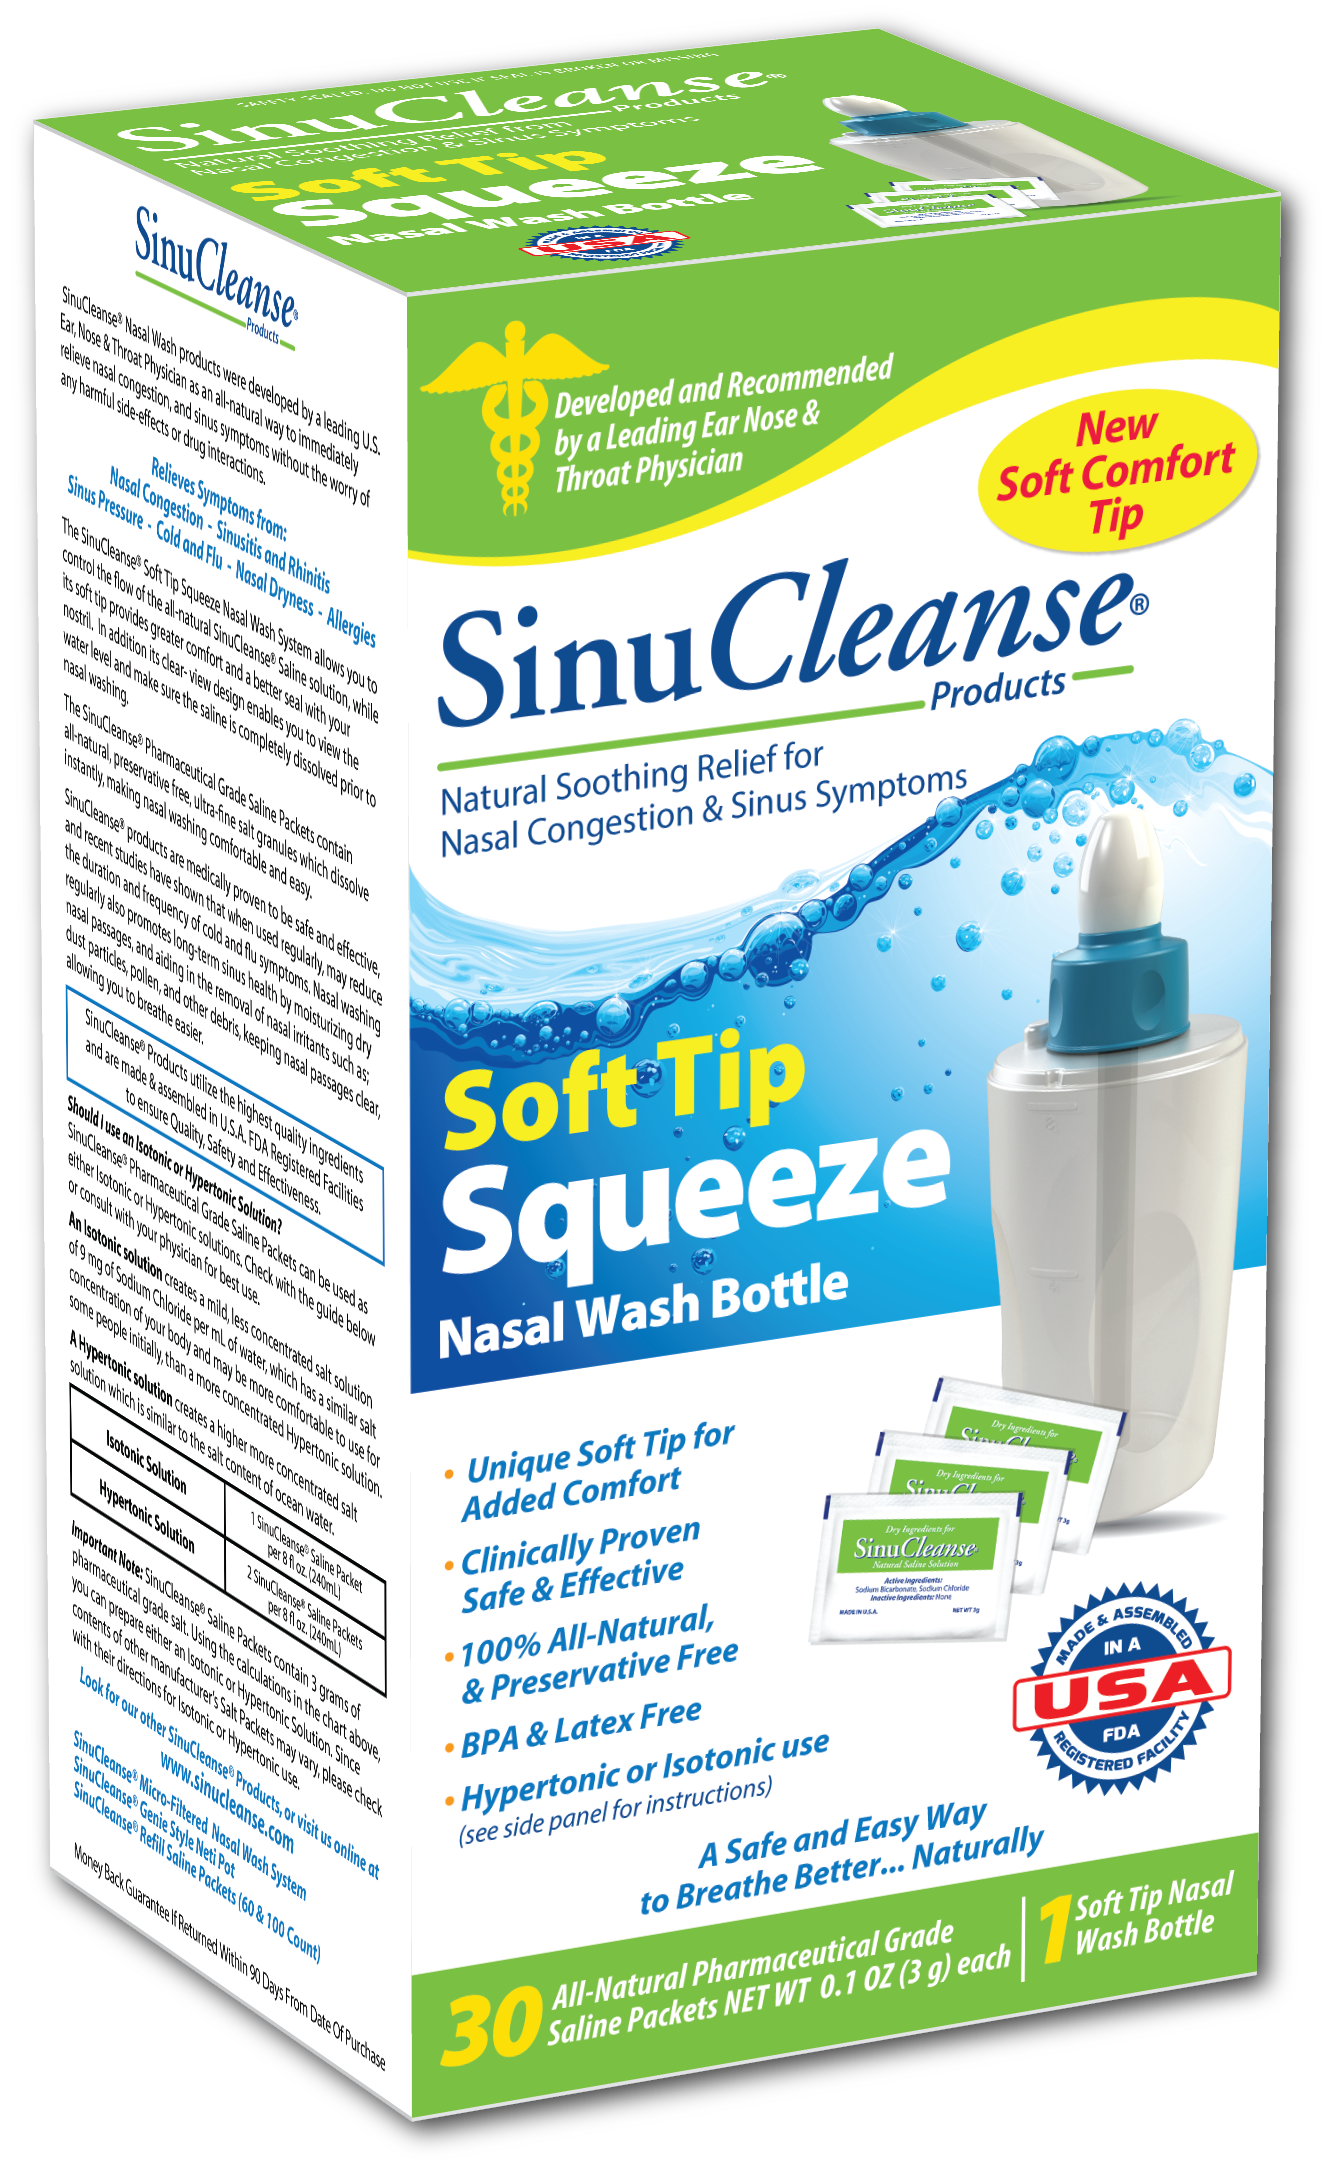 SinuCleanse Squeeze Bottle Nasal Wash System - image 2 of 2